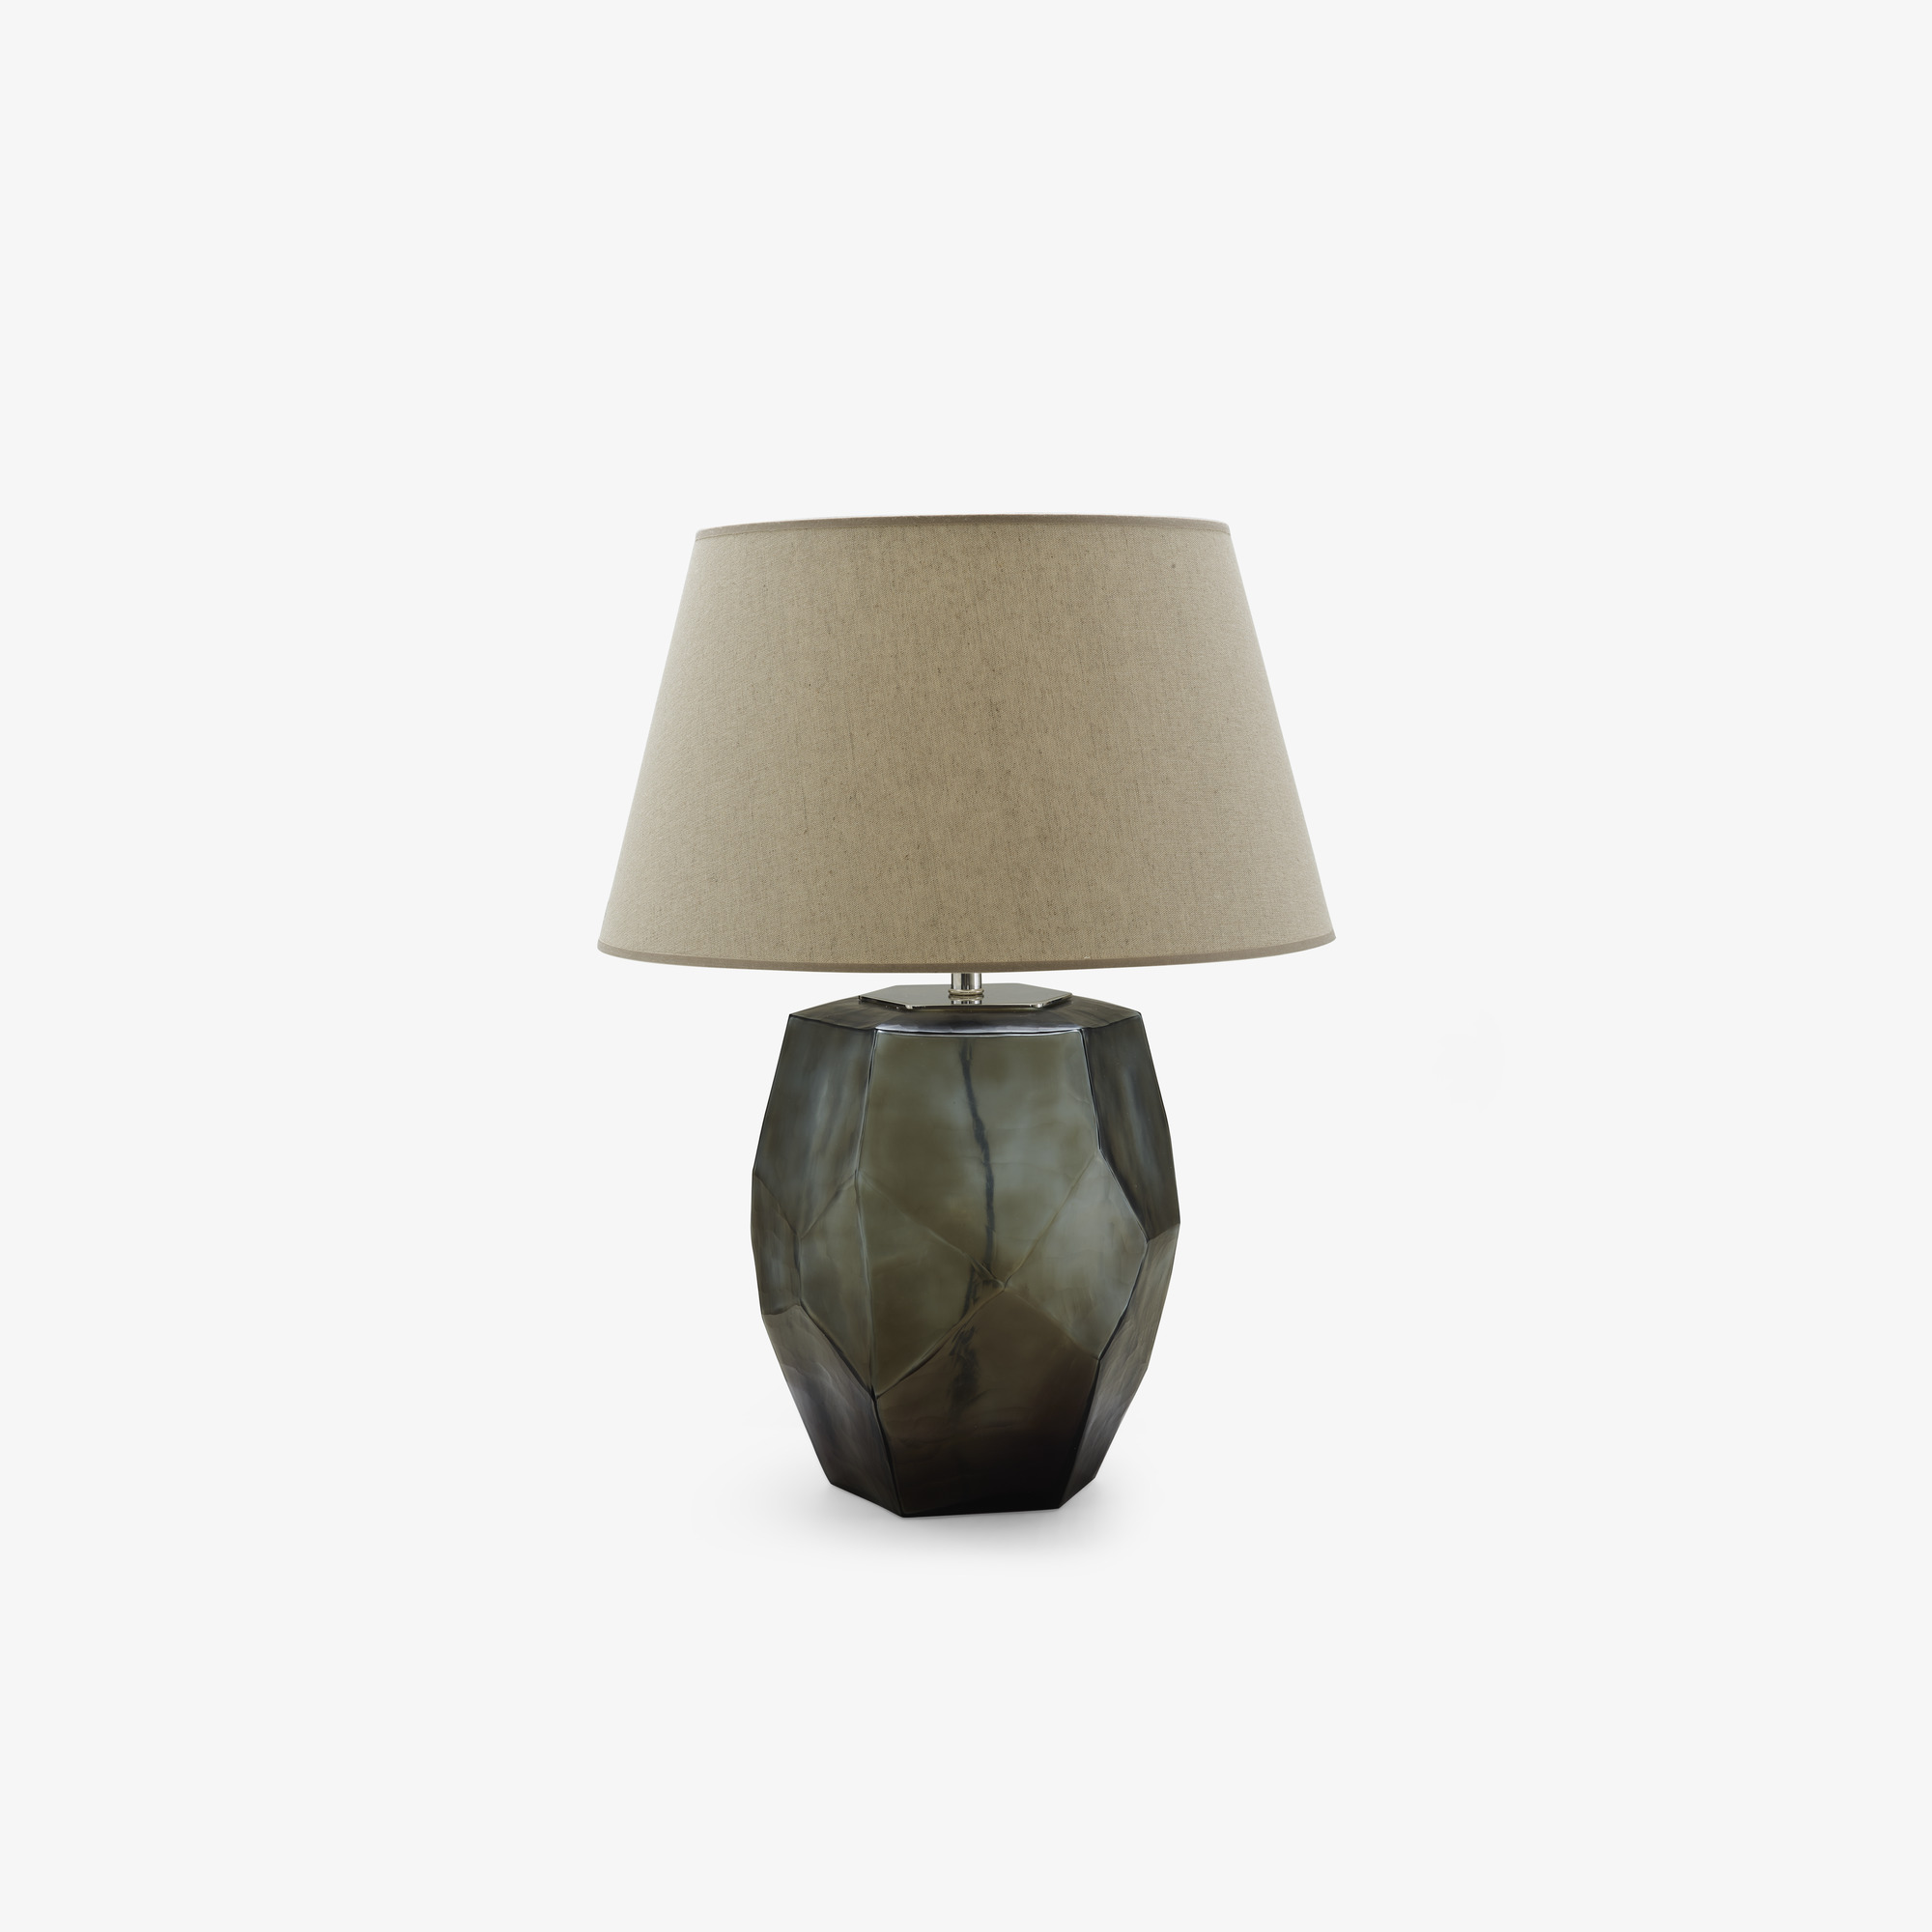 Image Table lamp   1